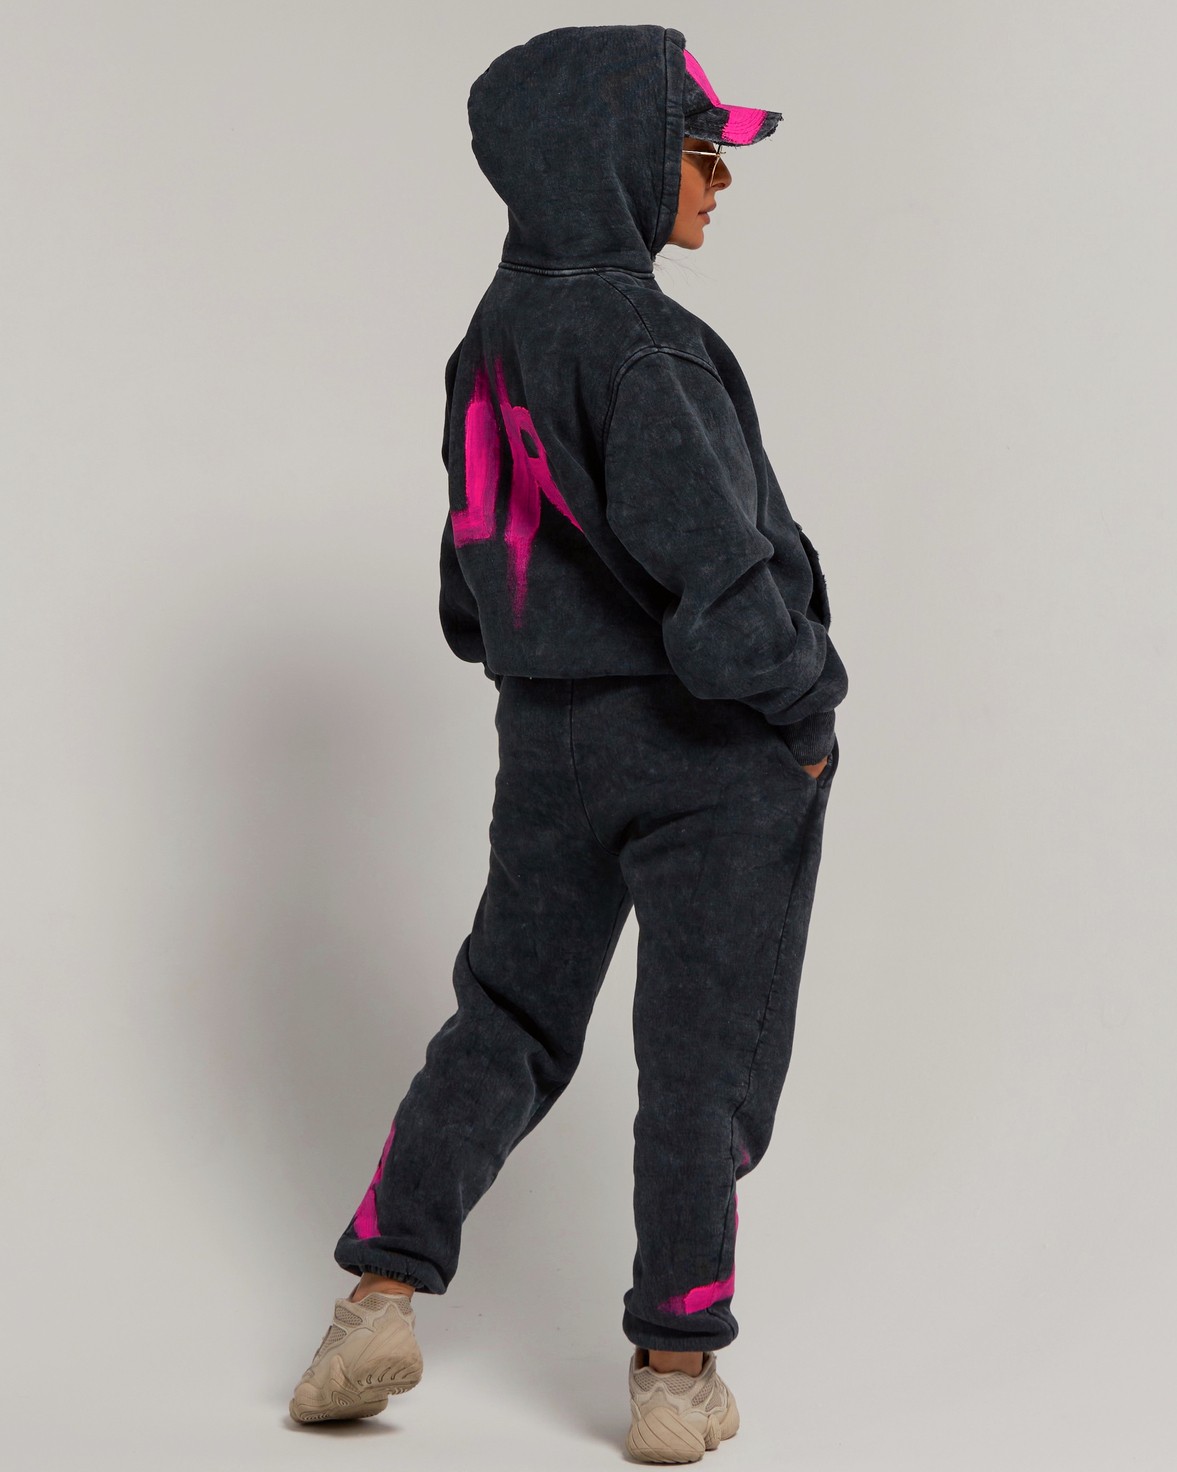 CHARCOAL GREY SOFT PANTS WITH PINK LOGO